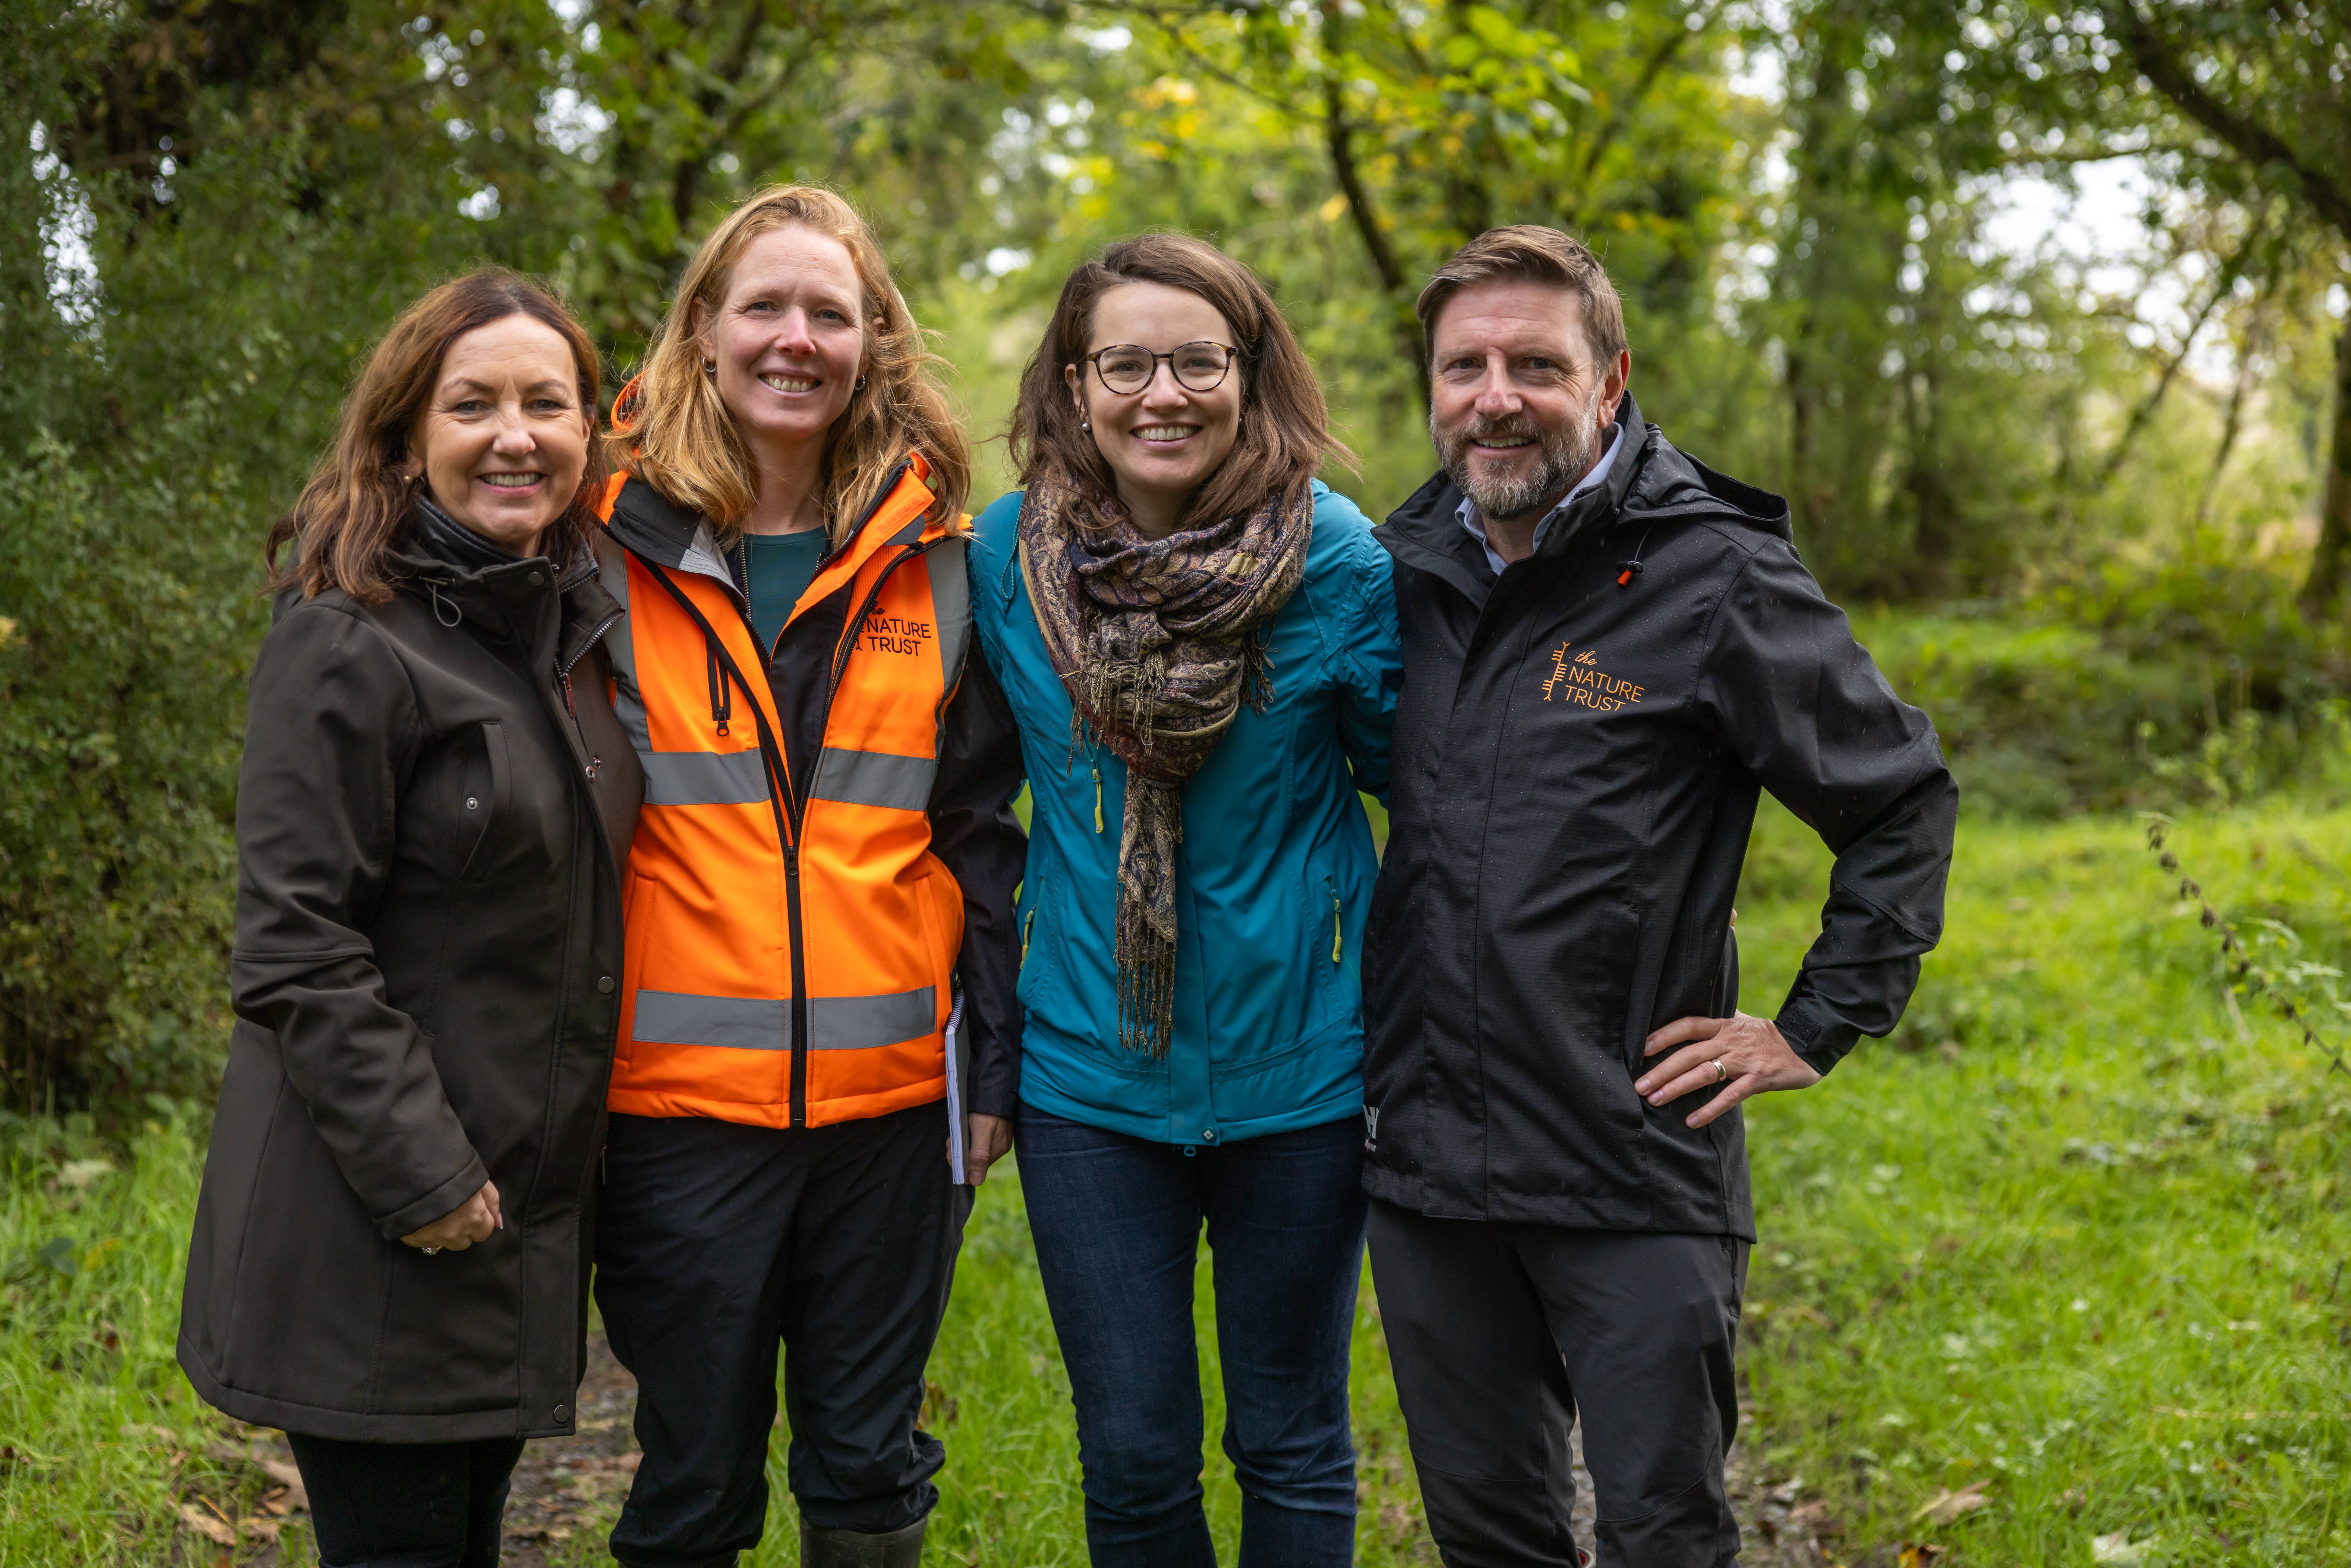 From left to right, Bríd O’Connell, CEO, Guaranteed Irish, Hedda Dick, Outreach Manager, The Nature Trust, Clémence Jamet, Sustainability Manager Guaranteed Irish, Ciarán Fallon, Managing Director, The Nature Trust